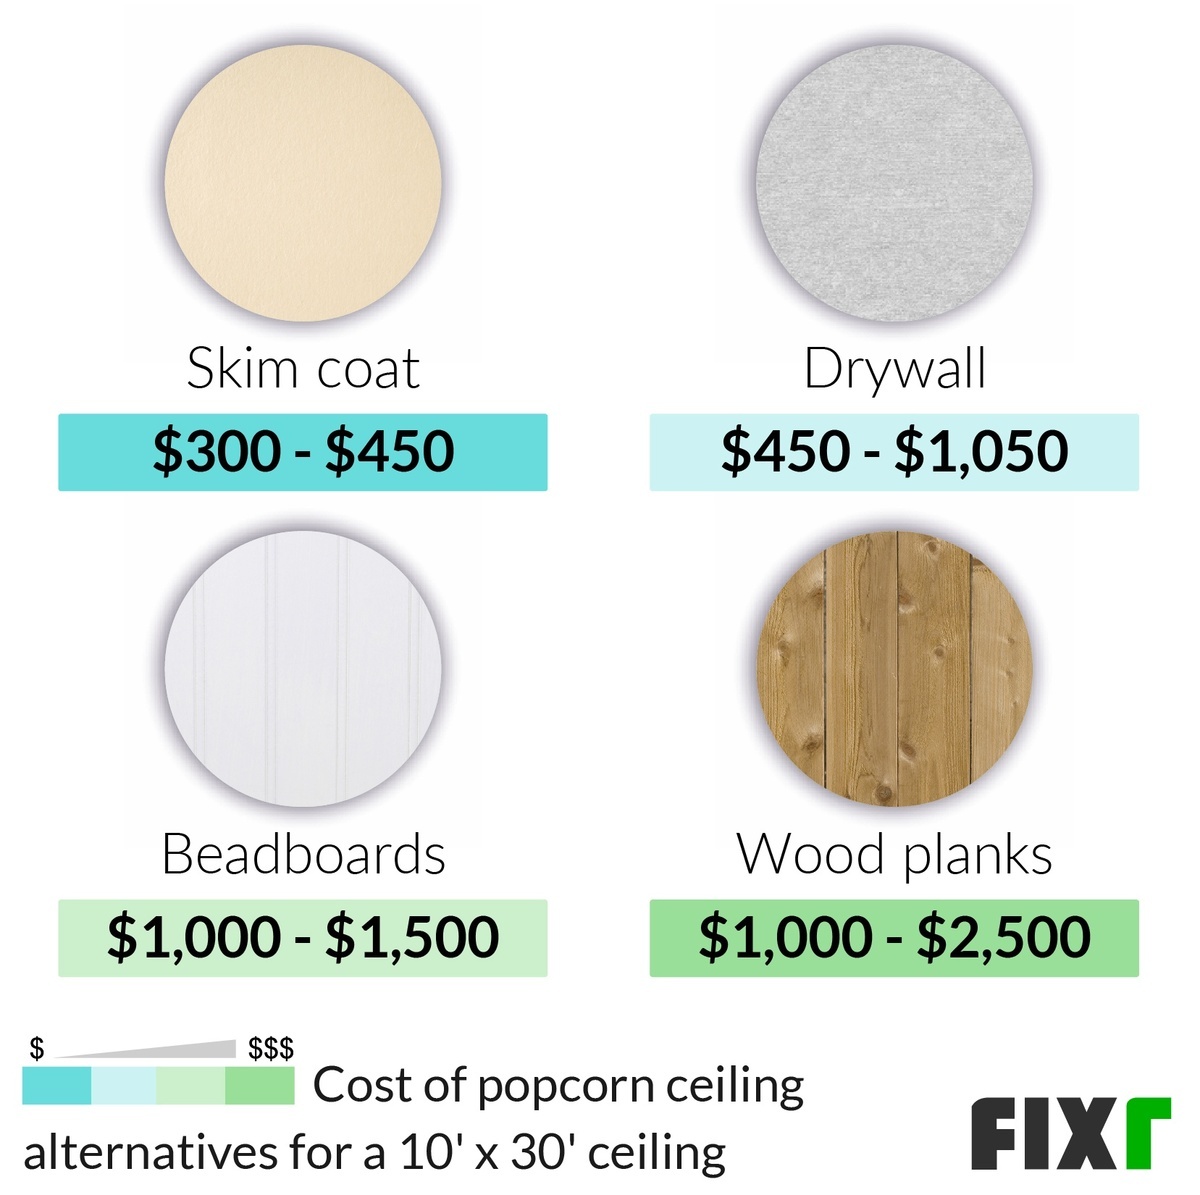 Cost of Popcorn Ceiling Removal Alternatives: Skim Coat, Drywall, Beadboards, and Wood Planks